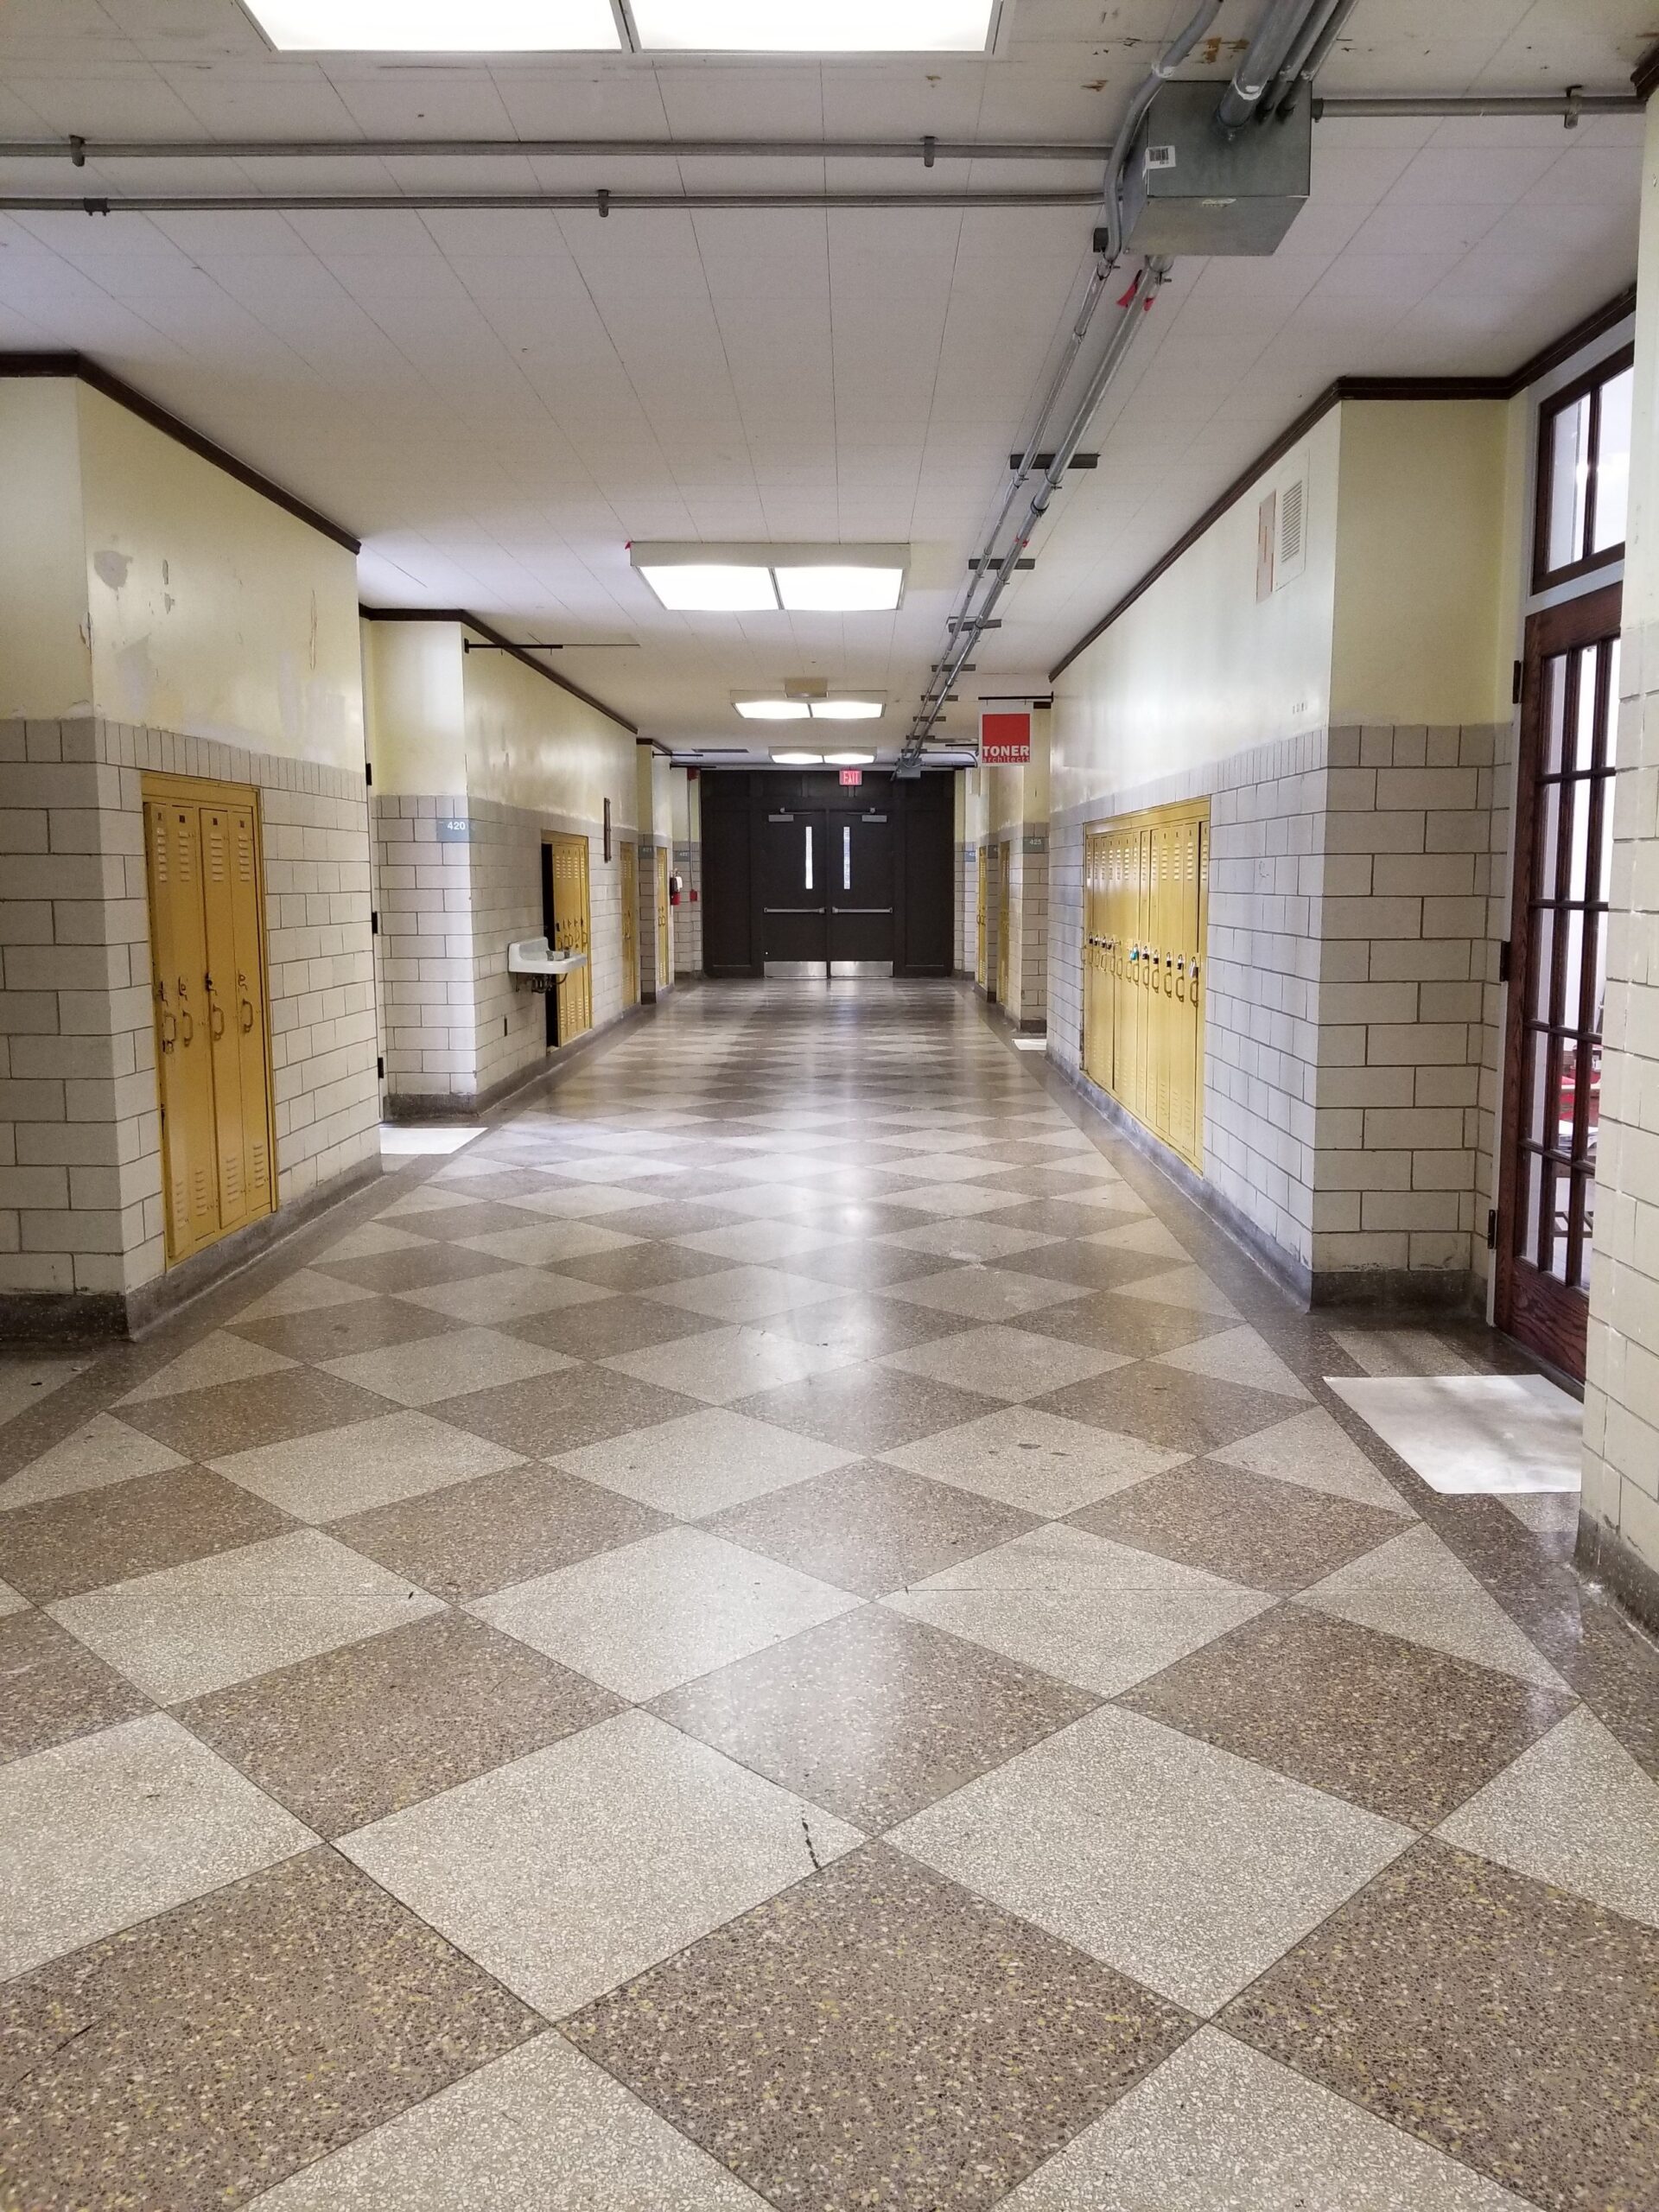 The hallway outside our office. Look at that great terrazzo floor!